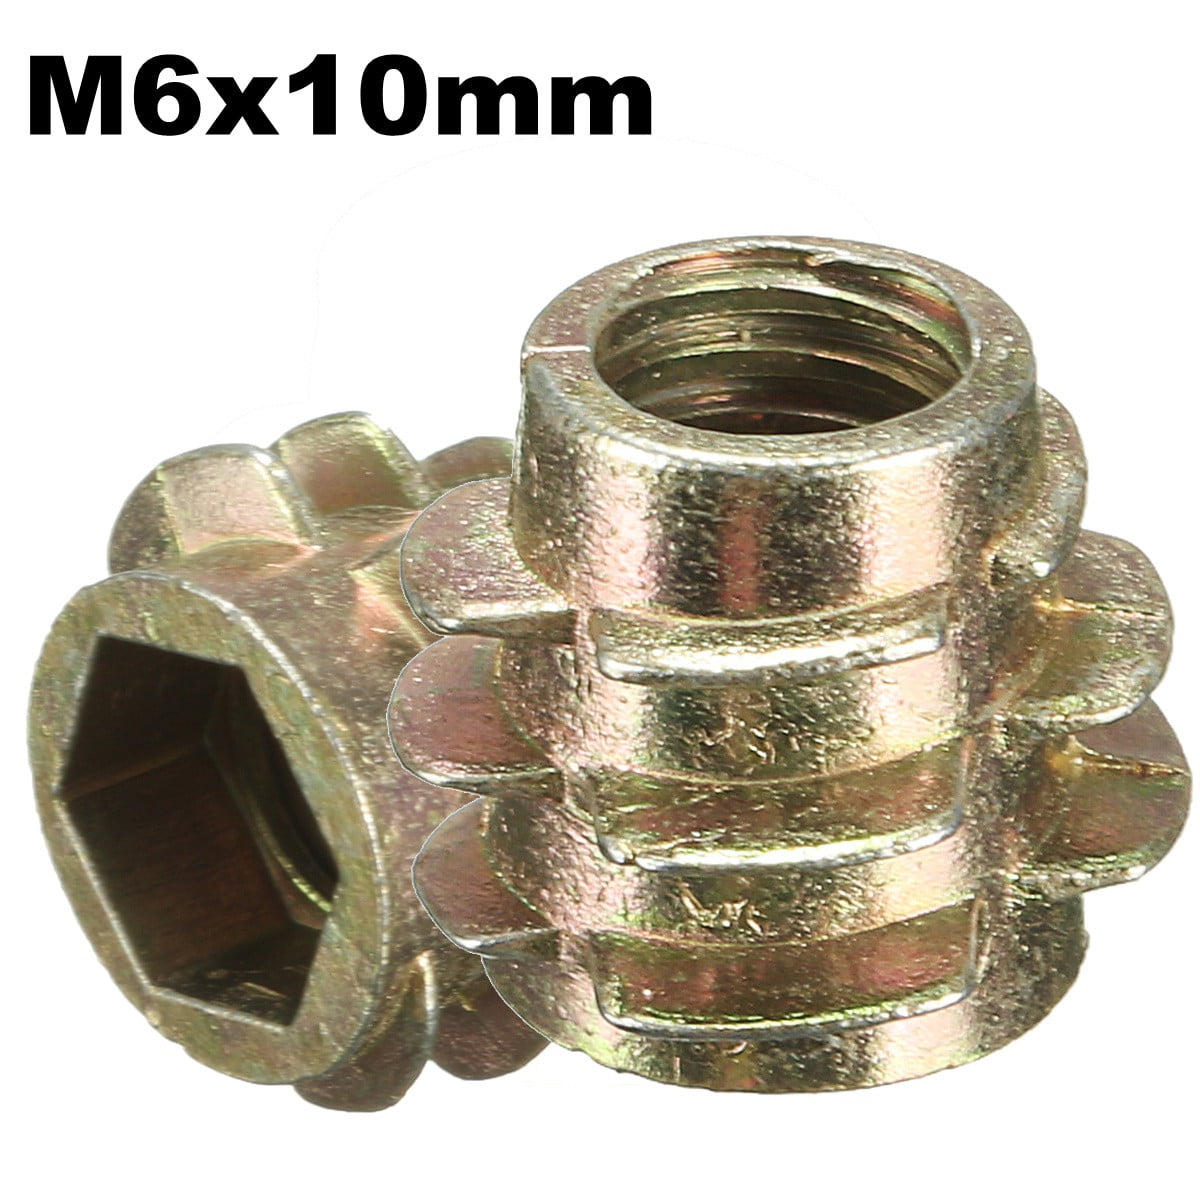 ALL SIZES M4 M5 M6 M8 M10 THREADED HEX DRIVE FIXING TYPE D WOOD INSERT NUTS 